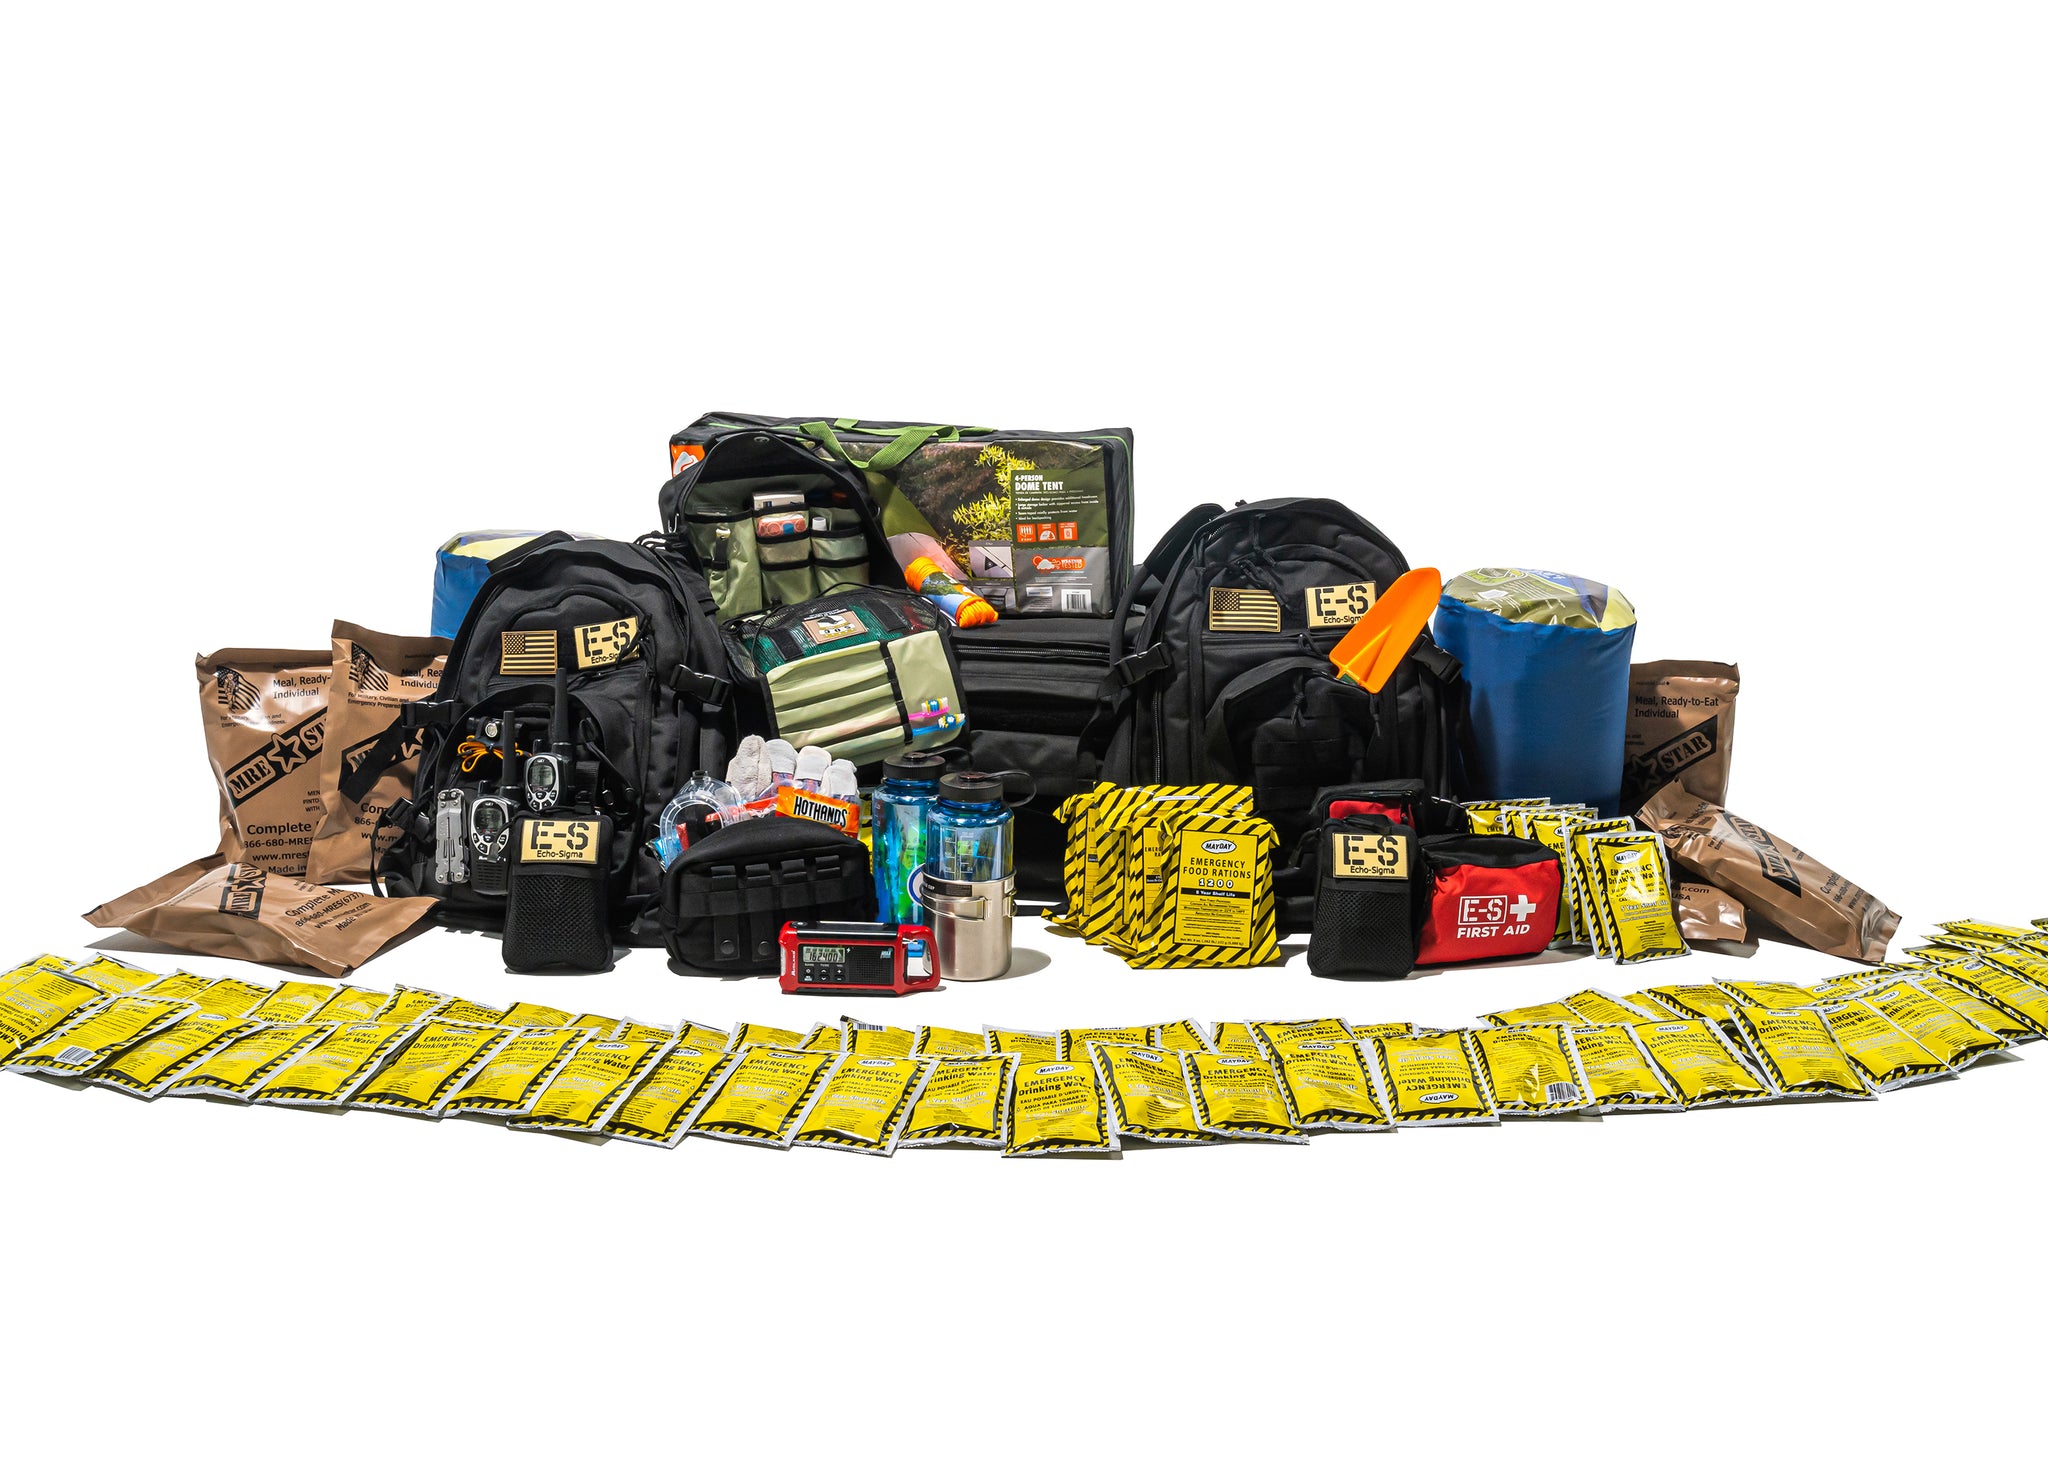 Get Home Bag - 72 Hour Bug Out Bag Complete Emergency Kit for Sale - Echo-Sigma Compact Survival Kit